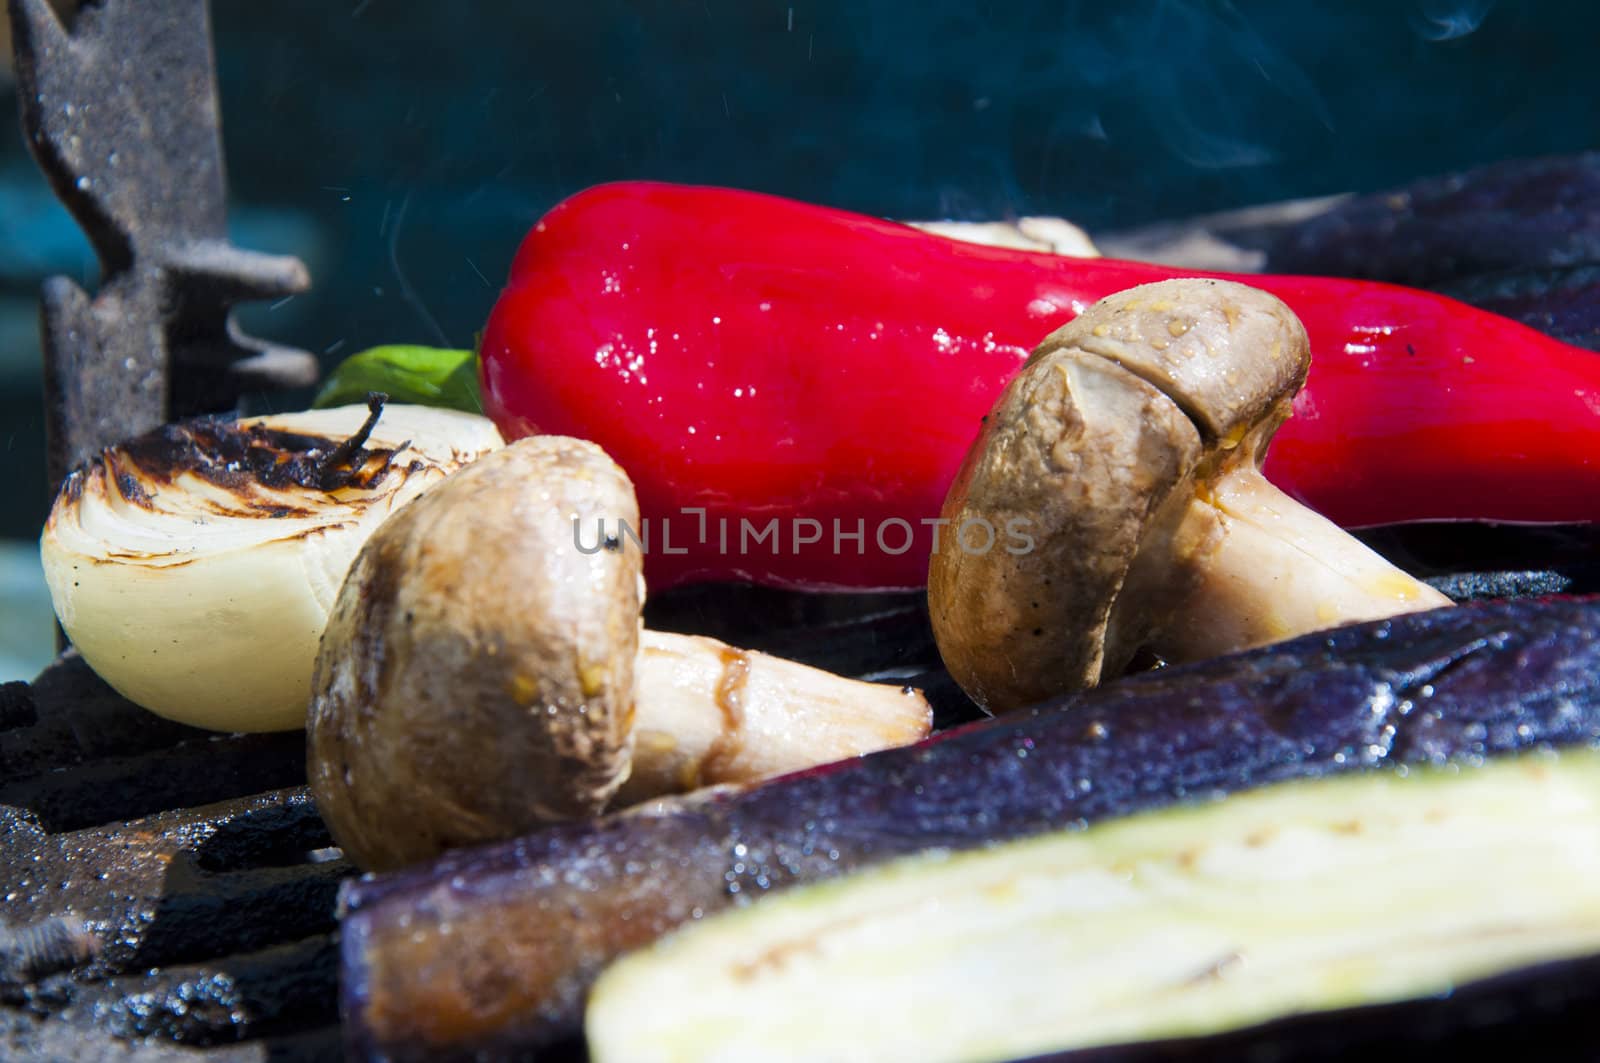 Vegetables cooked on the grill in the garden